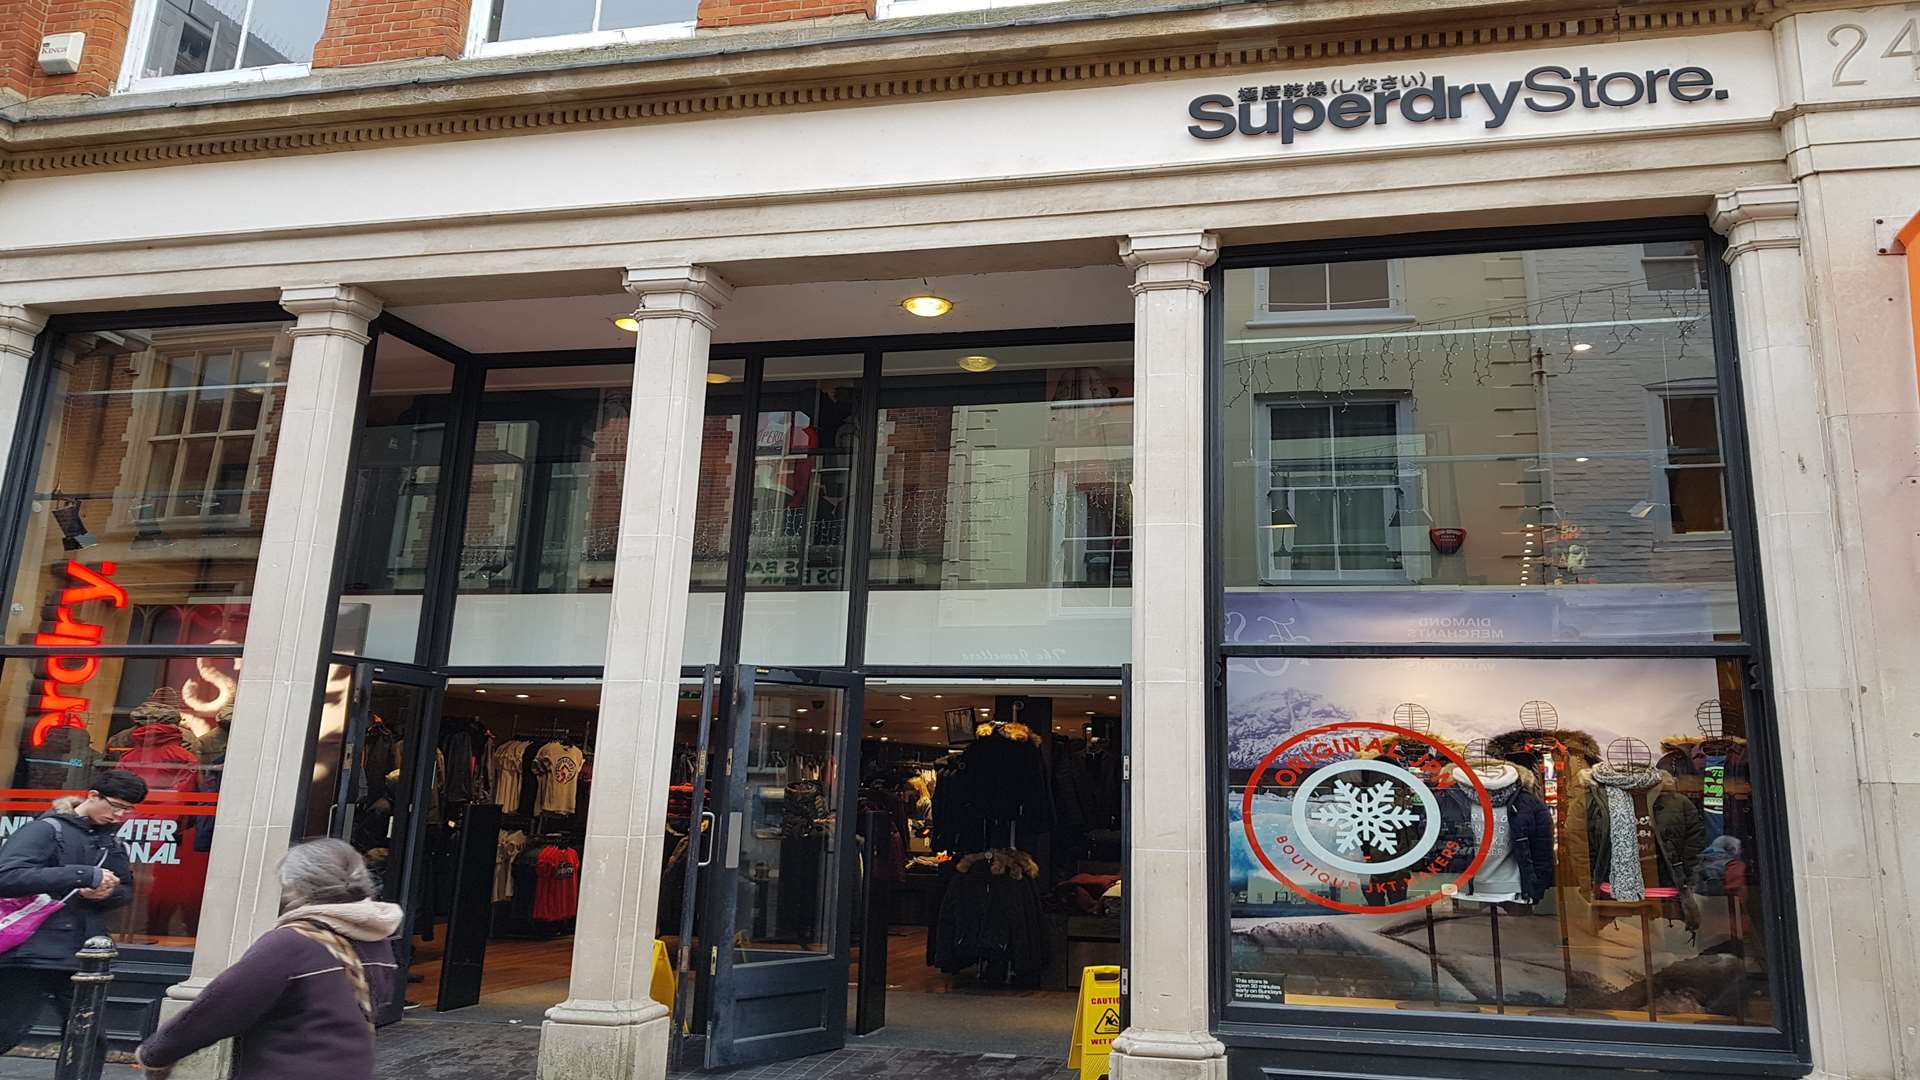 24 St Margaret’s Street, Canterbury – the home of Superdry – is said to be haunted